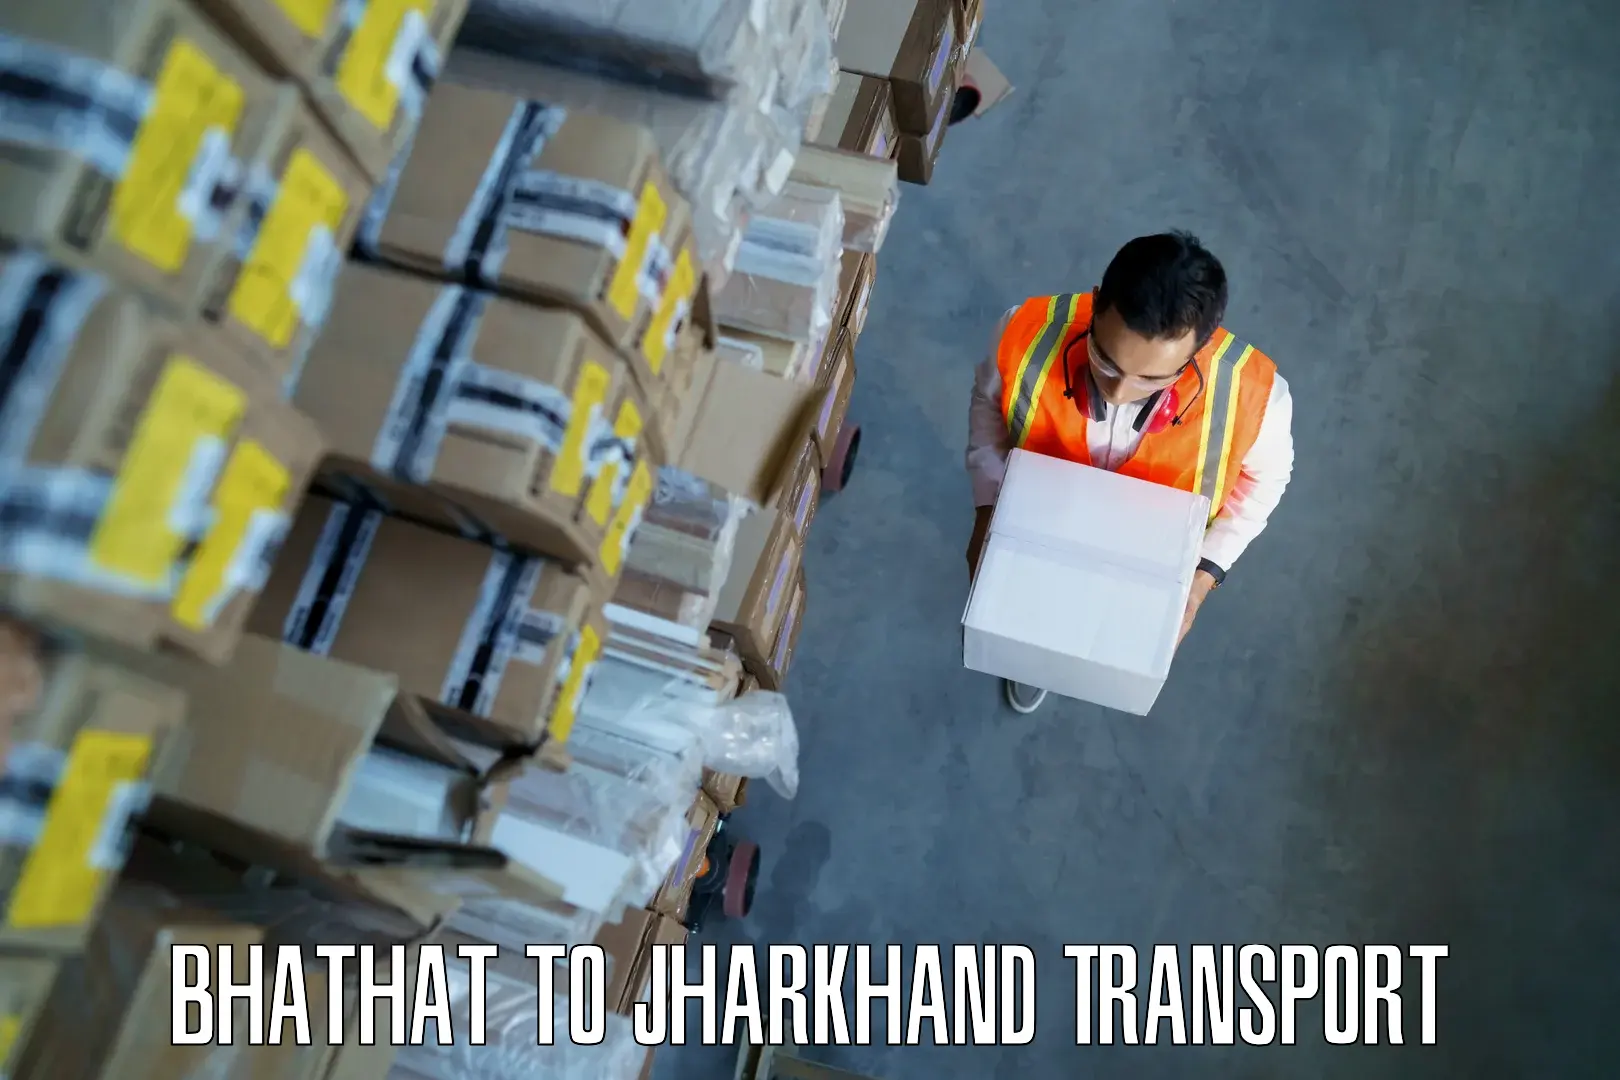 Parcel transport services Bhathat to Shikaripara